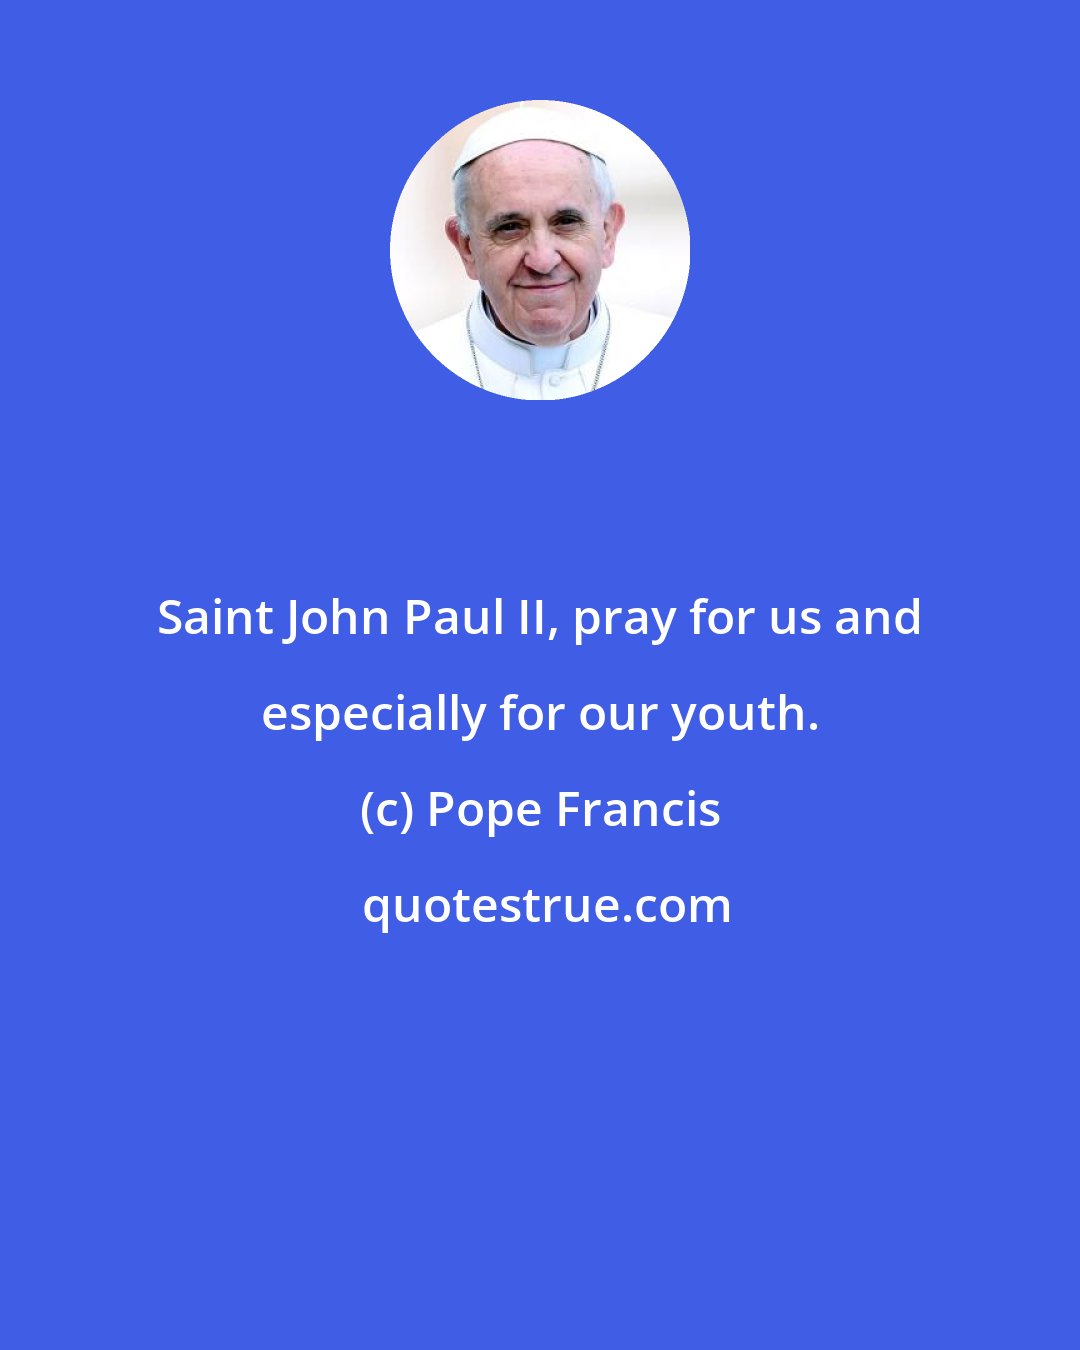 Pope Francis: Saint John Paul II, pray for us and especially for our youth.